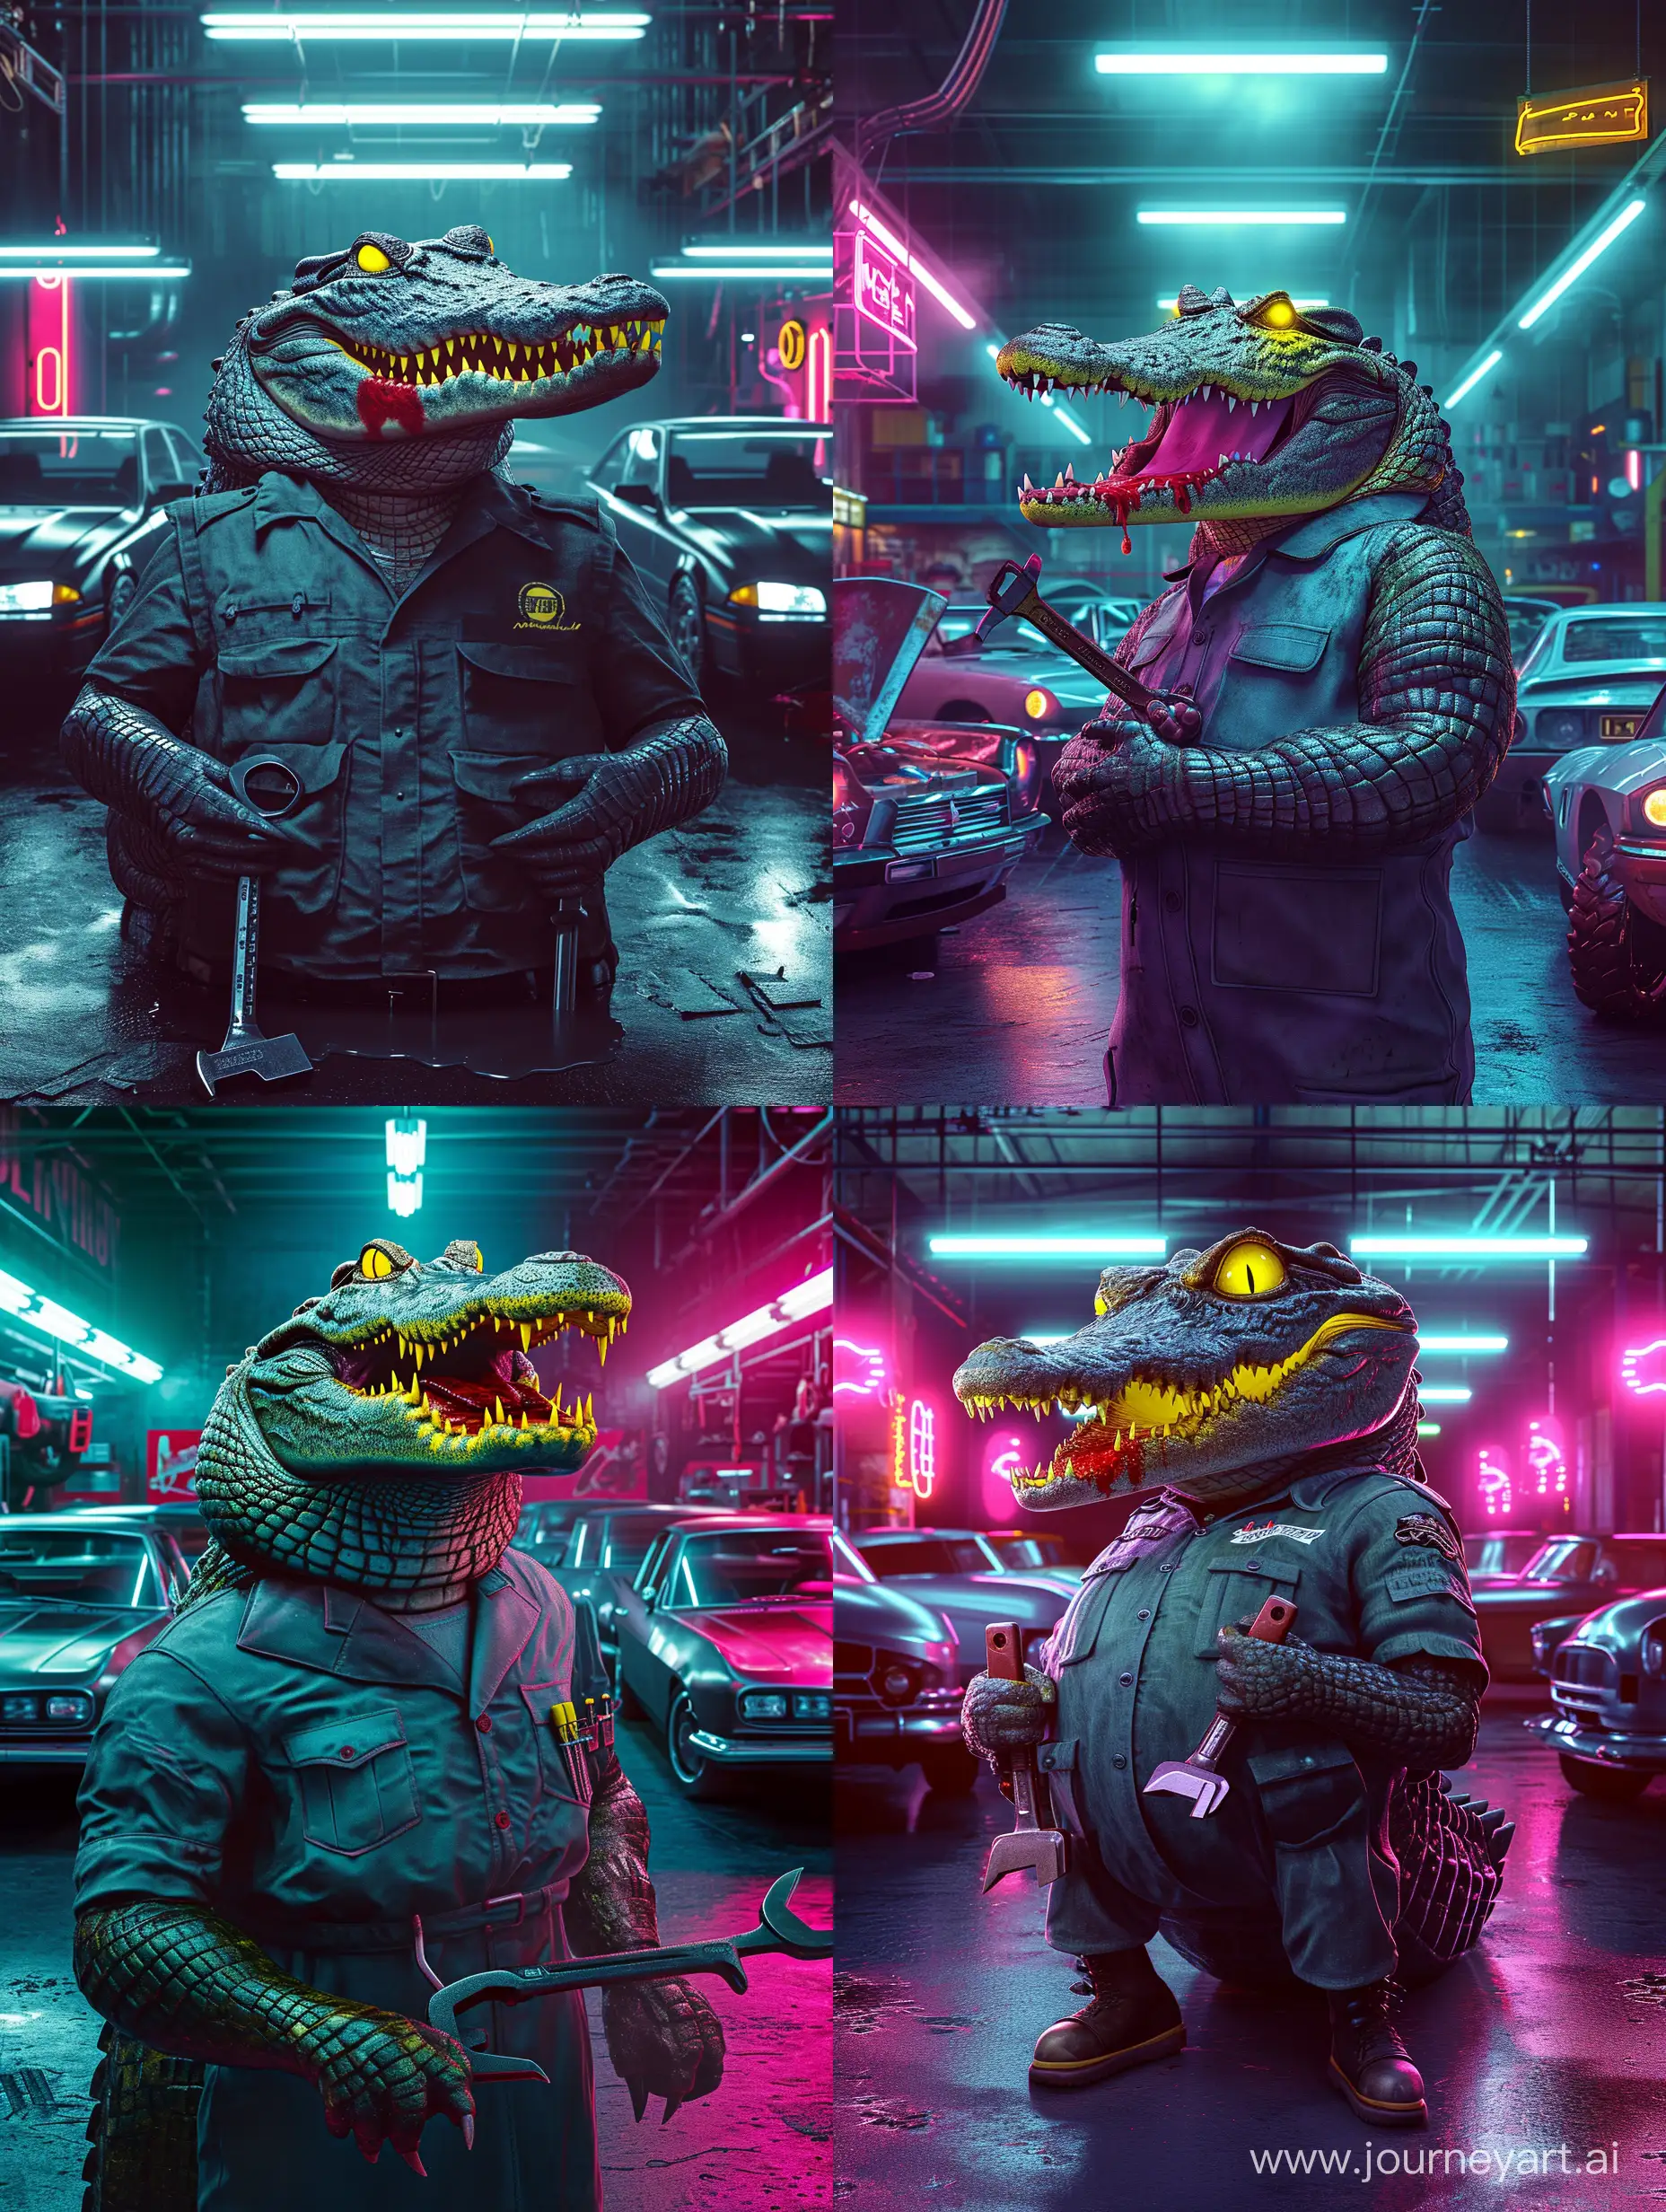 Sinister-Crocodile-Mechanic-in-Neonlit-Workshop-with-Wrench